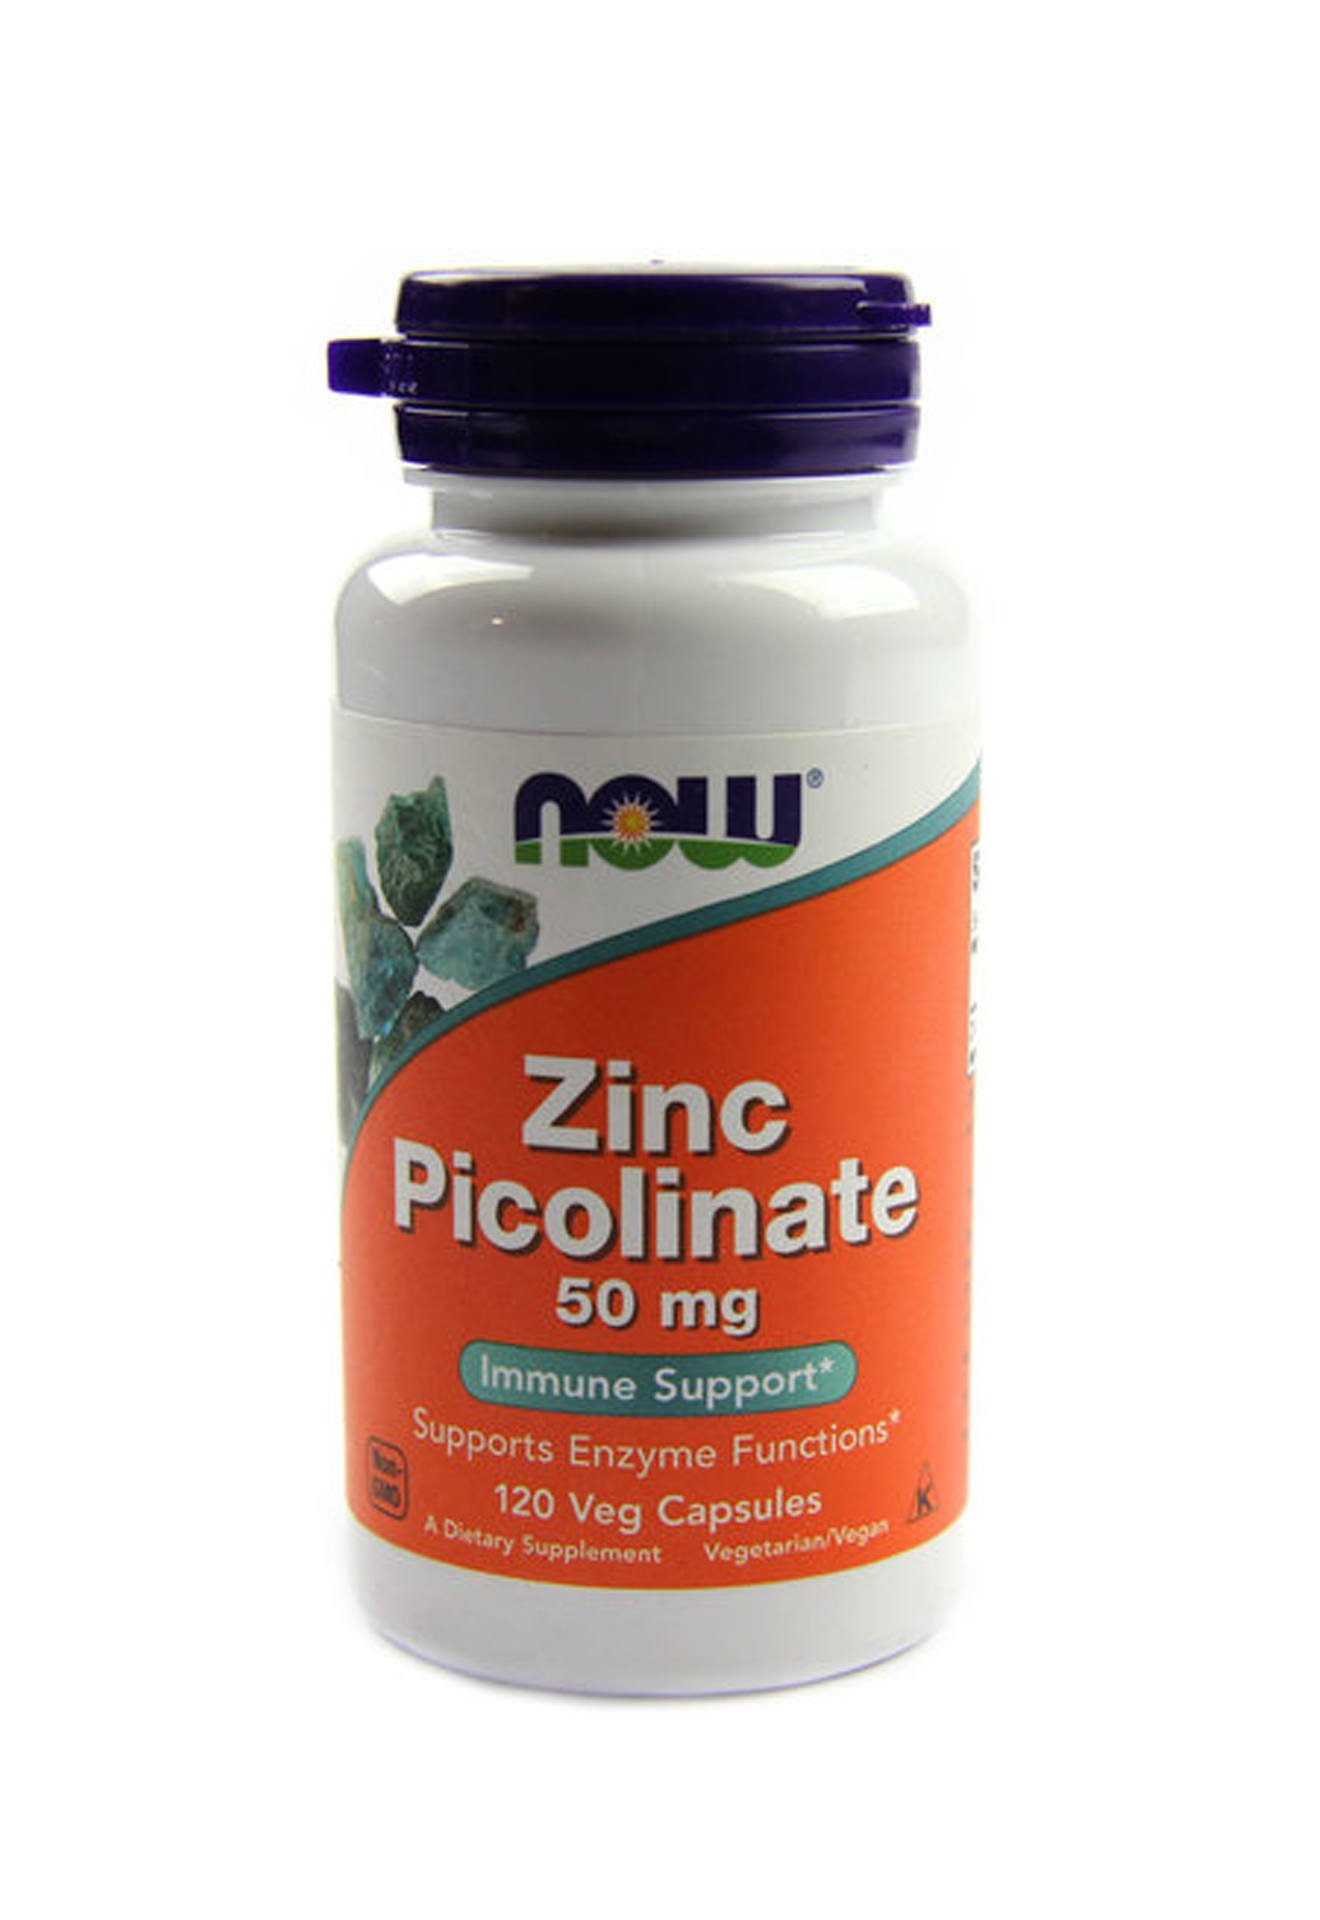 Zn 50. Пиколинат цинка 50мг Now. Now Zinc Picolinate 50 MG 60 VCAPS. Zinc Picolinate 50 мг. Now Zinc Picolinate 120.